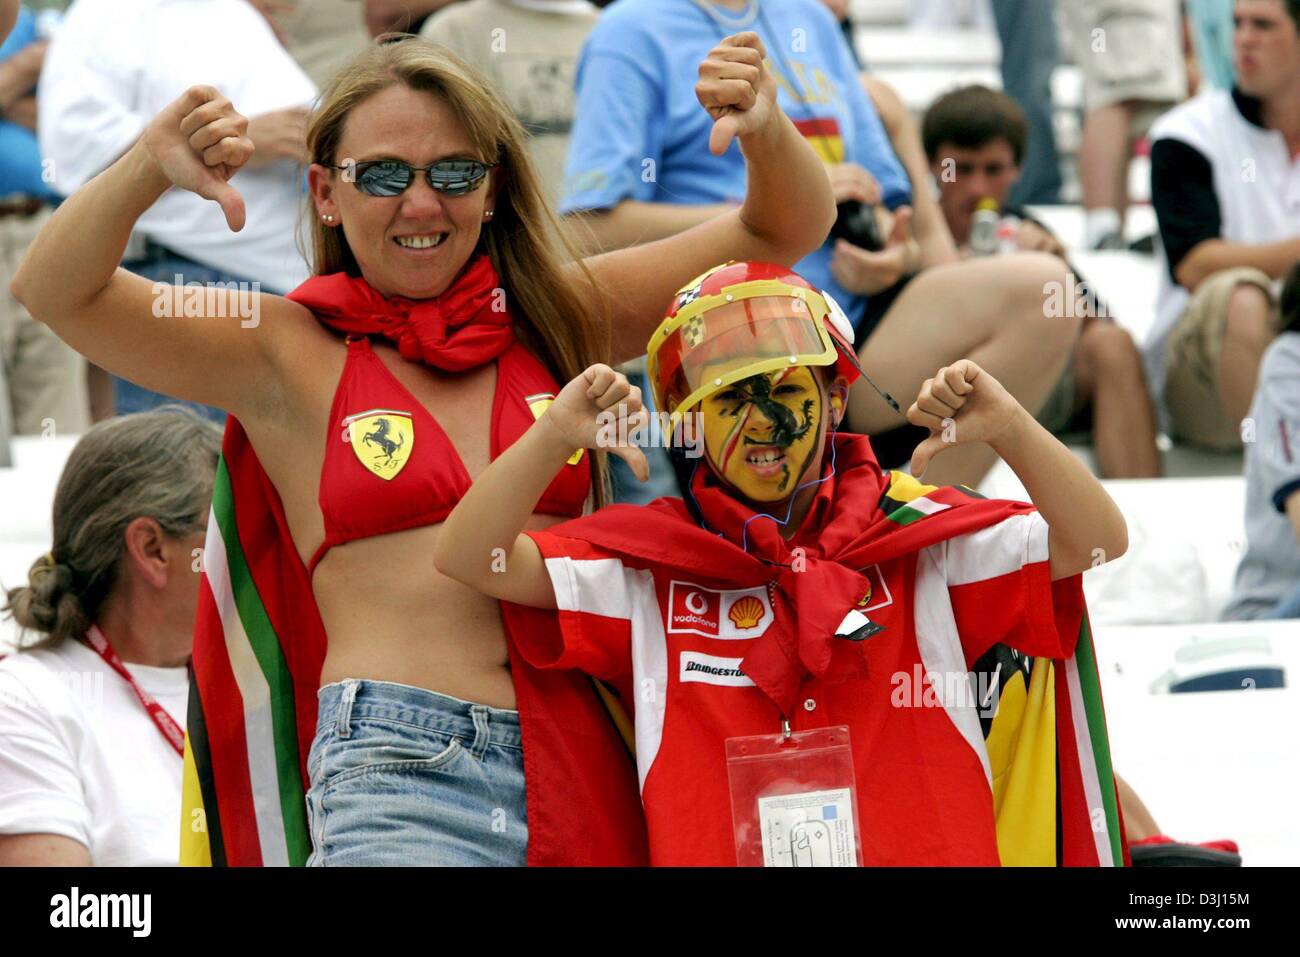 dpa) - The picture shows Formula One fans protesting with thumbs